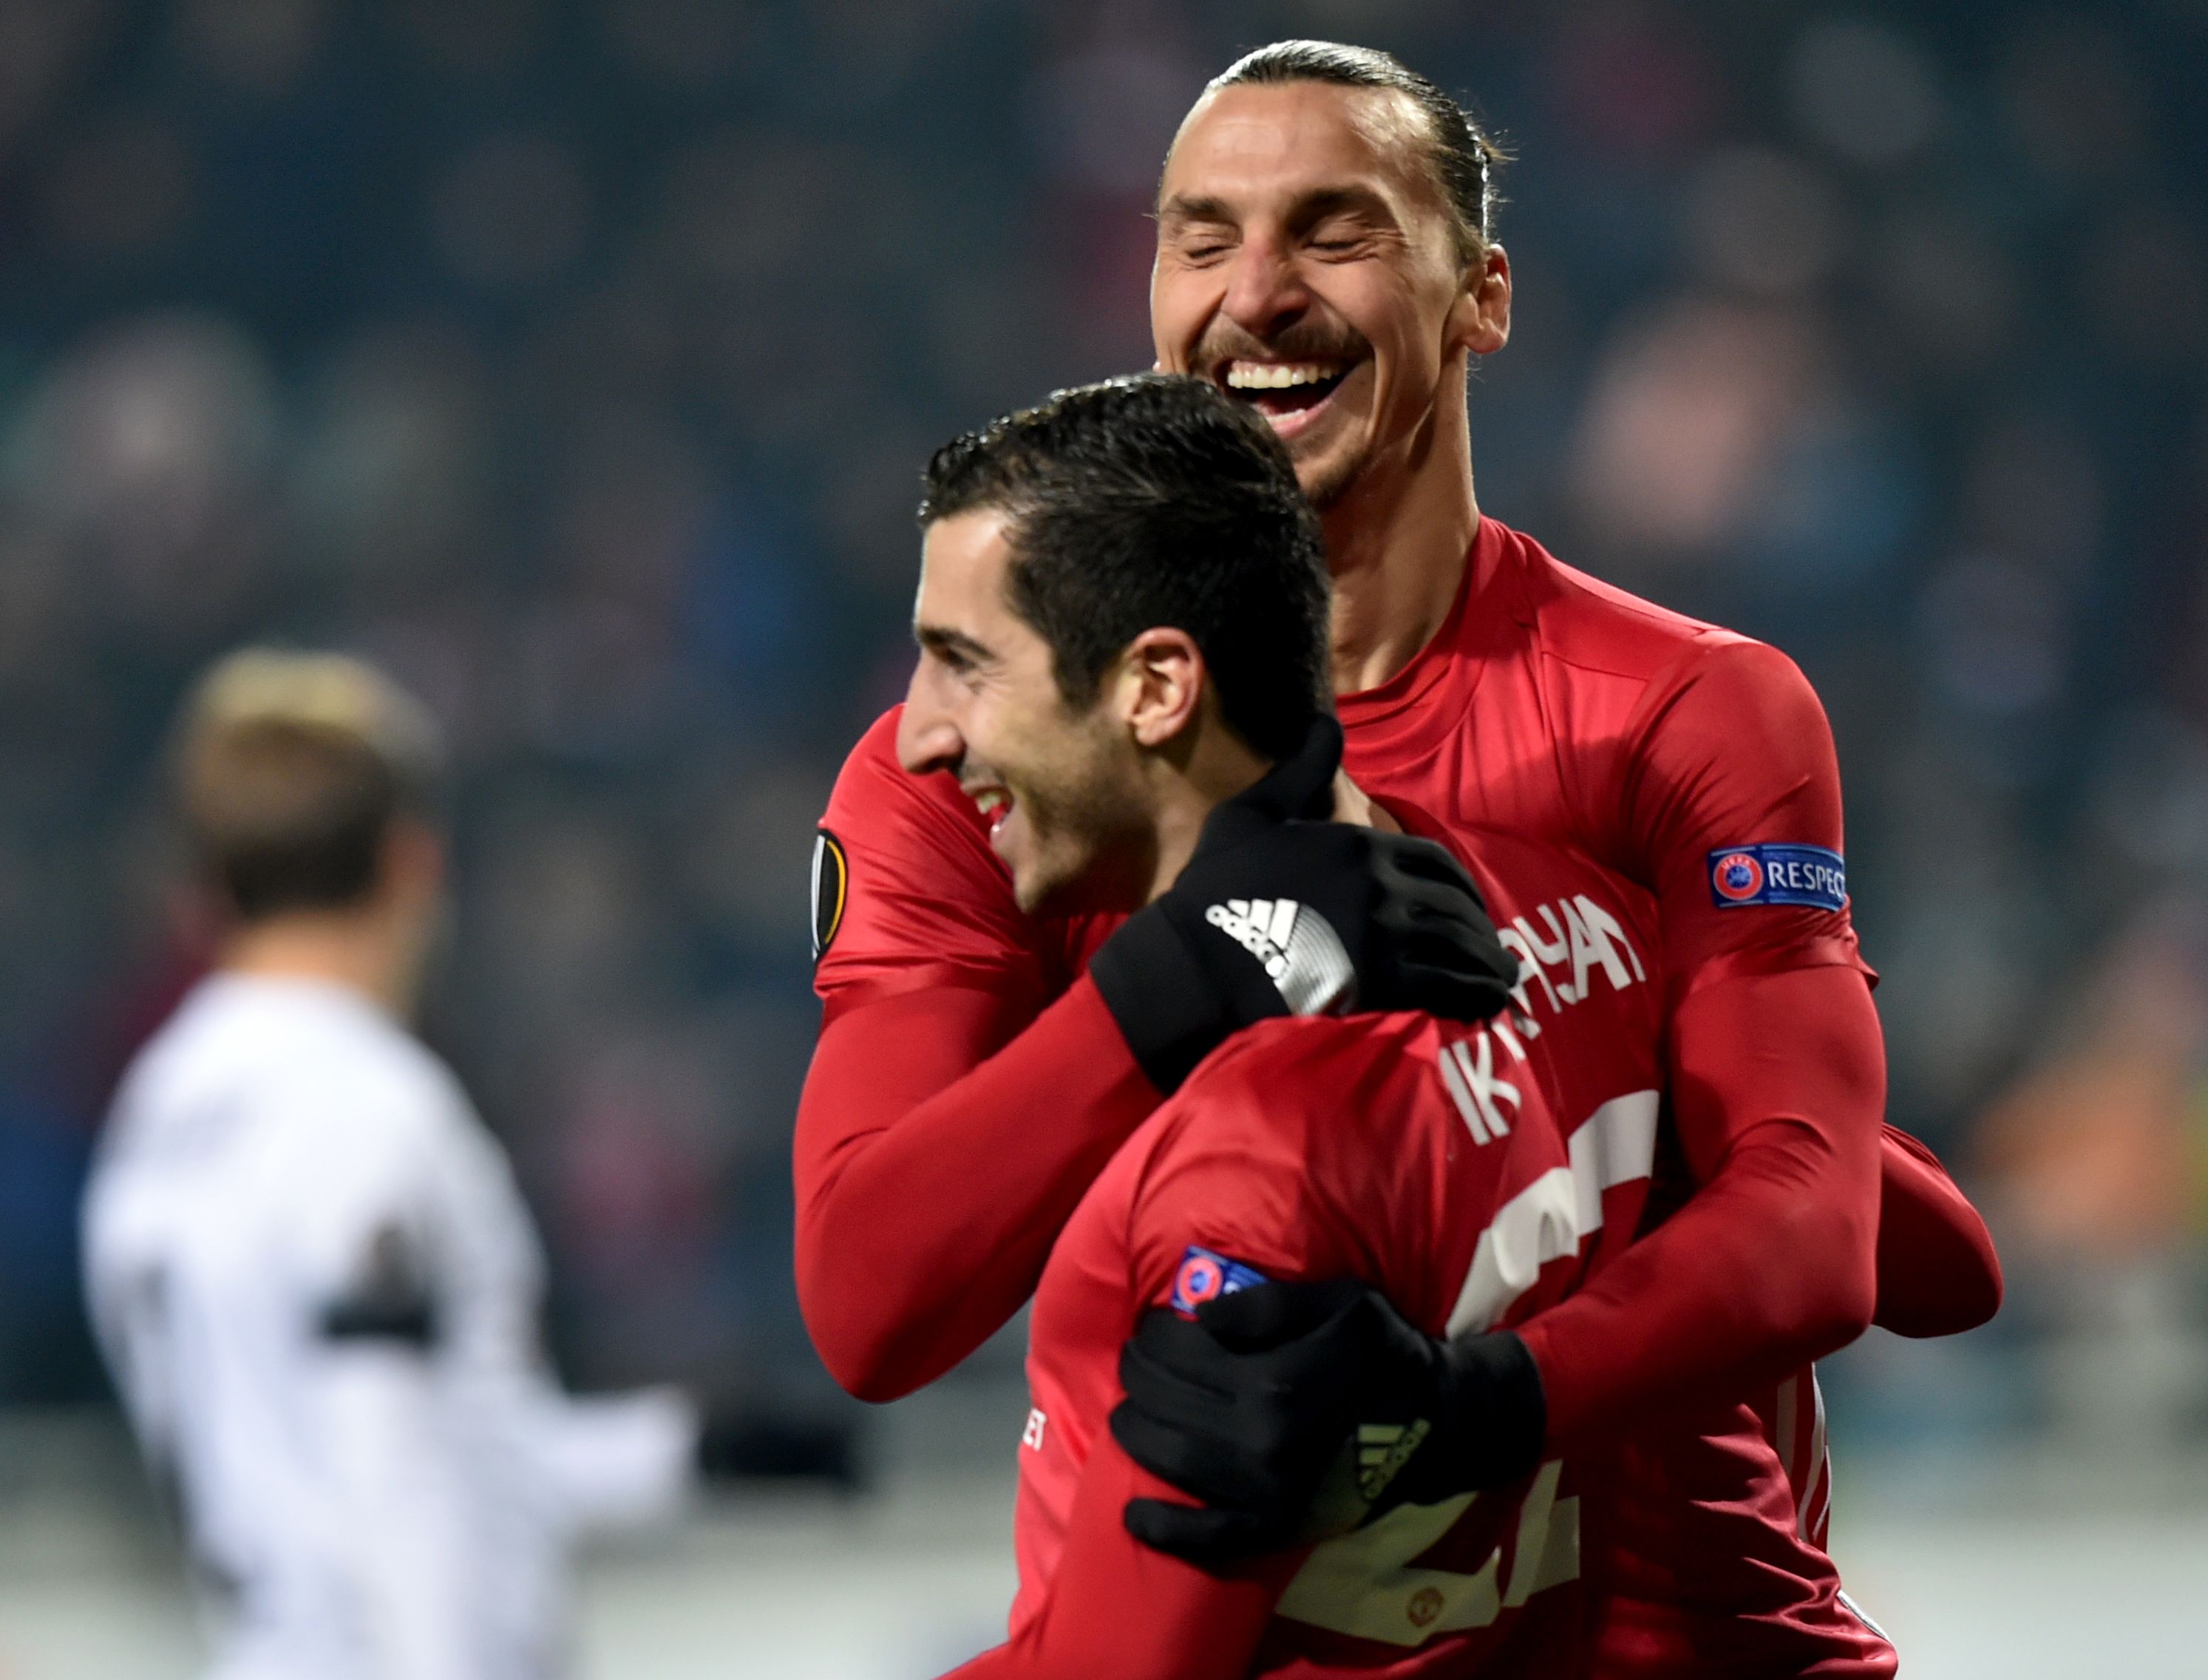 Manchester United's Armenian midfielder Henrikh Mkhitaryan (L) celebrates after scoring a goal, with teammate Swedish forward Zlatan Ibrahimovic during the UEFA Europa League football match between FC Zorya Luhansk and Manchester United FC at the Chornomorets stadium in Odessa on December 8, 2016 / AFP / Sergei SUPINSKY        (Photo credit should read SERGEI SUPINSKY/AFP/Getty Images)